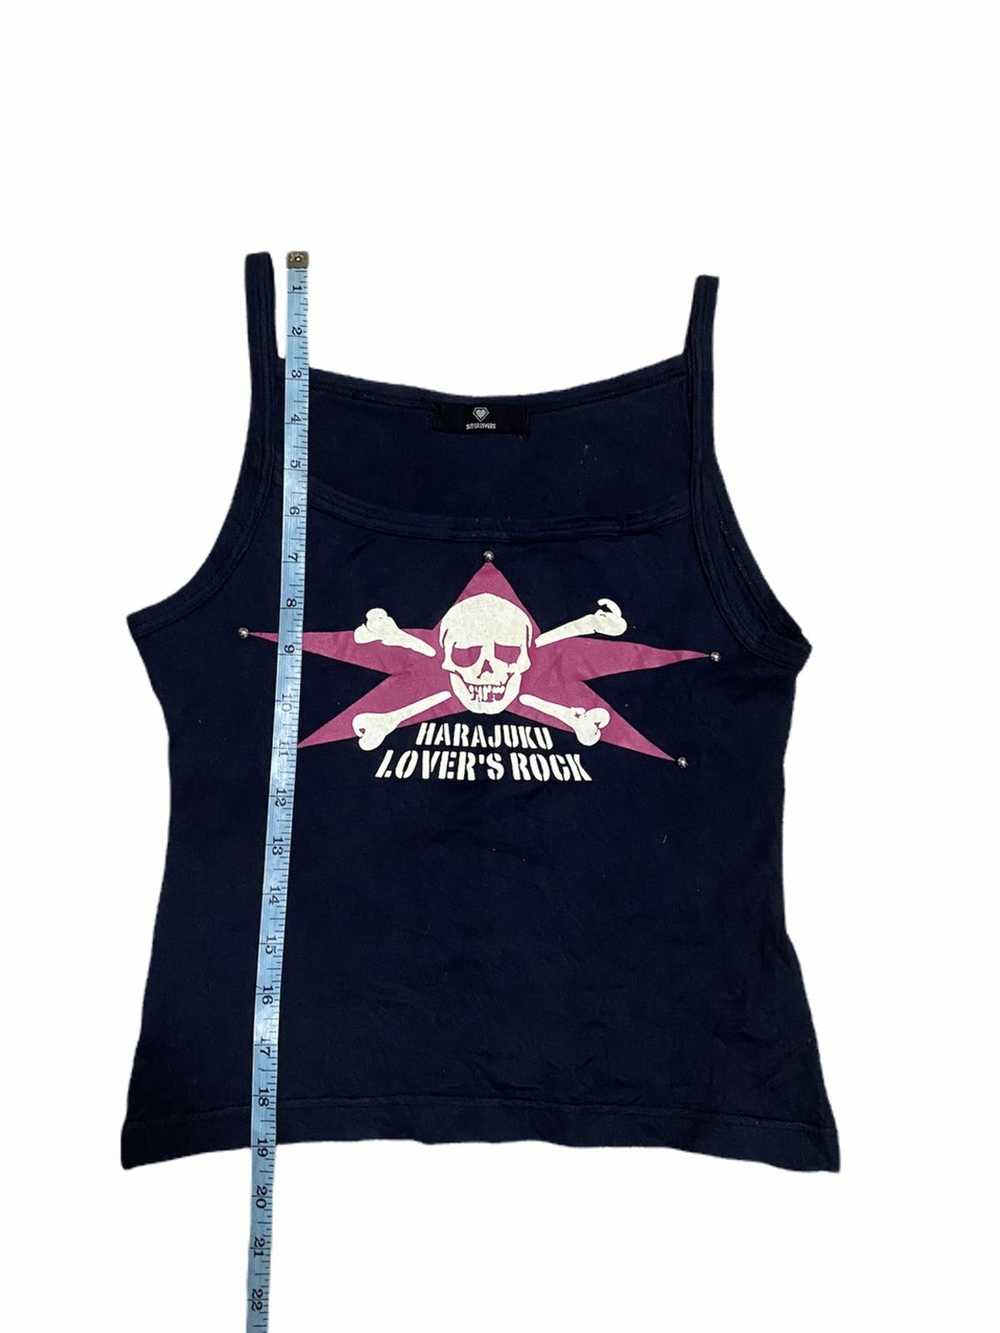 Japanese Brand SUPER LOVERS Tank Top for ladies - image 4